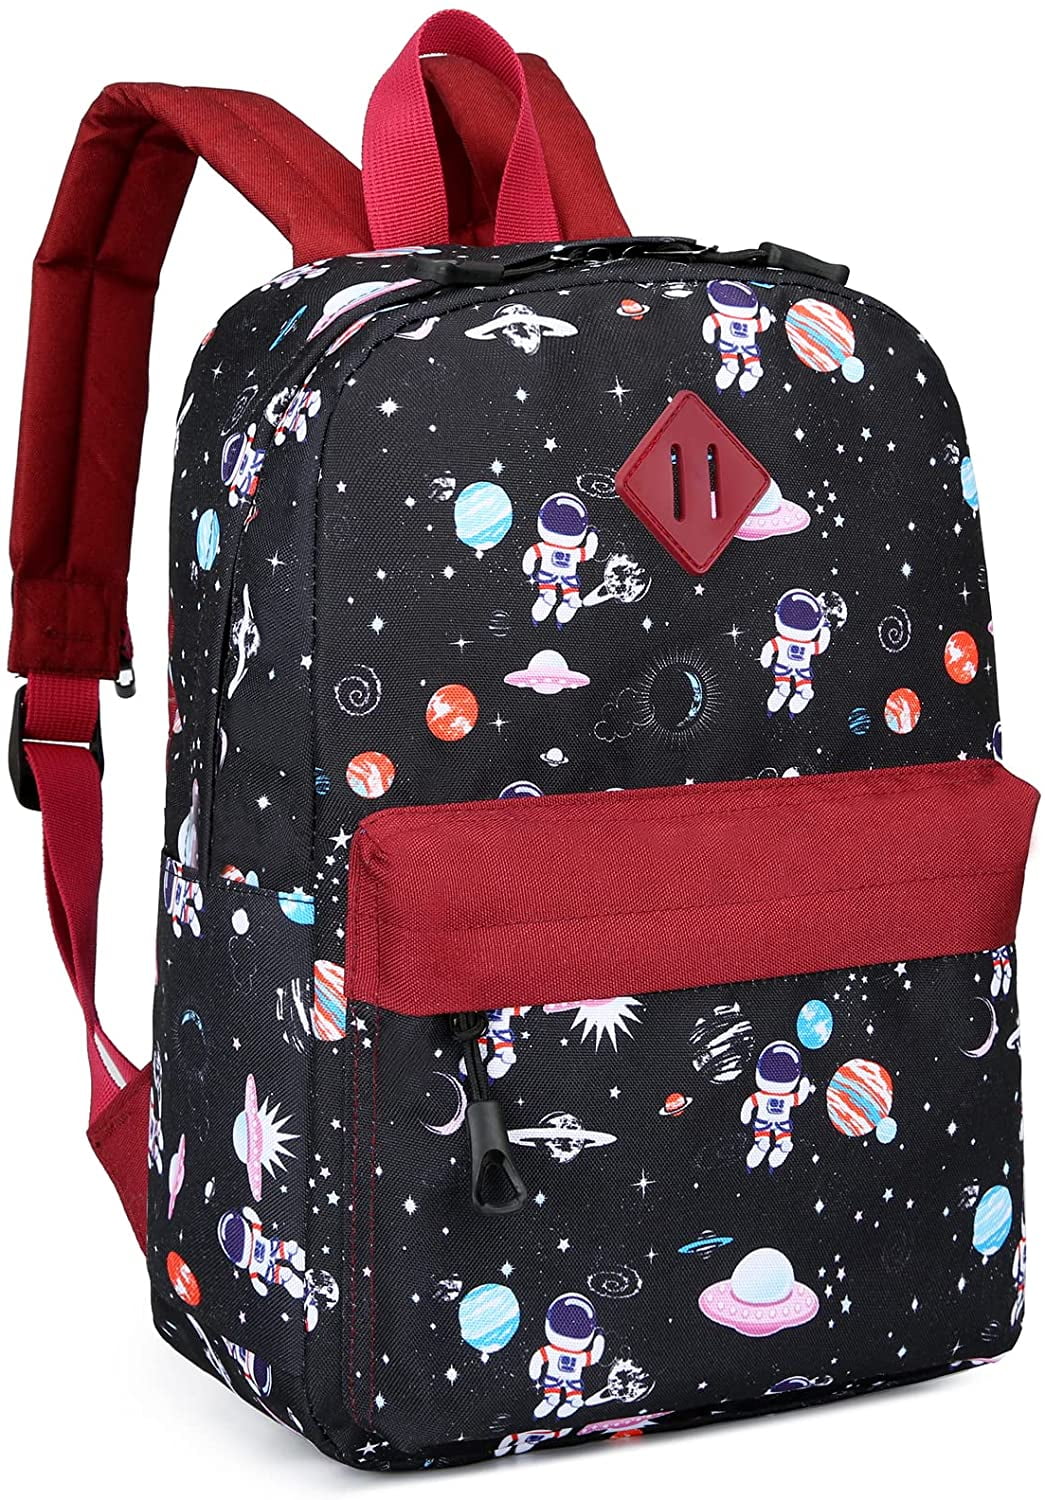 ILEEY Flamingos Pattern With Plants School Backpack Book Bag for Boys Girls and Kids